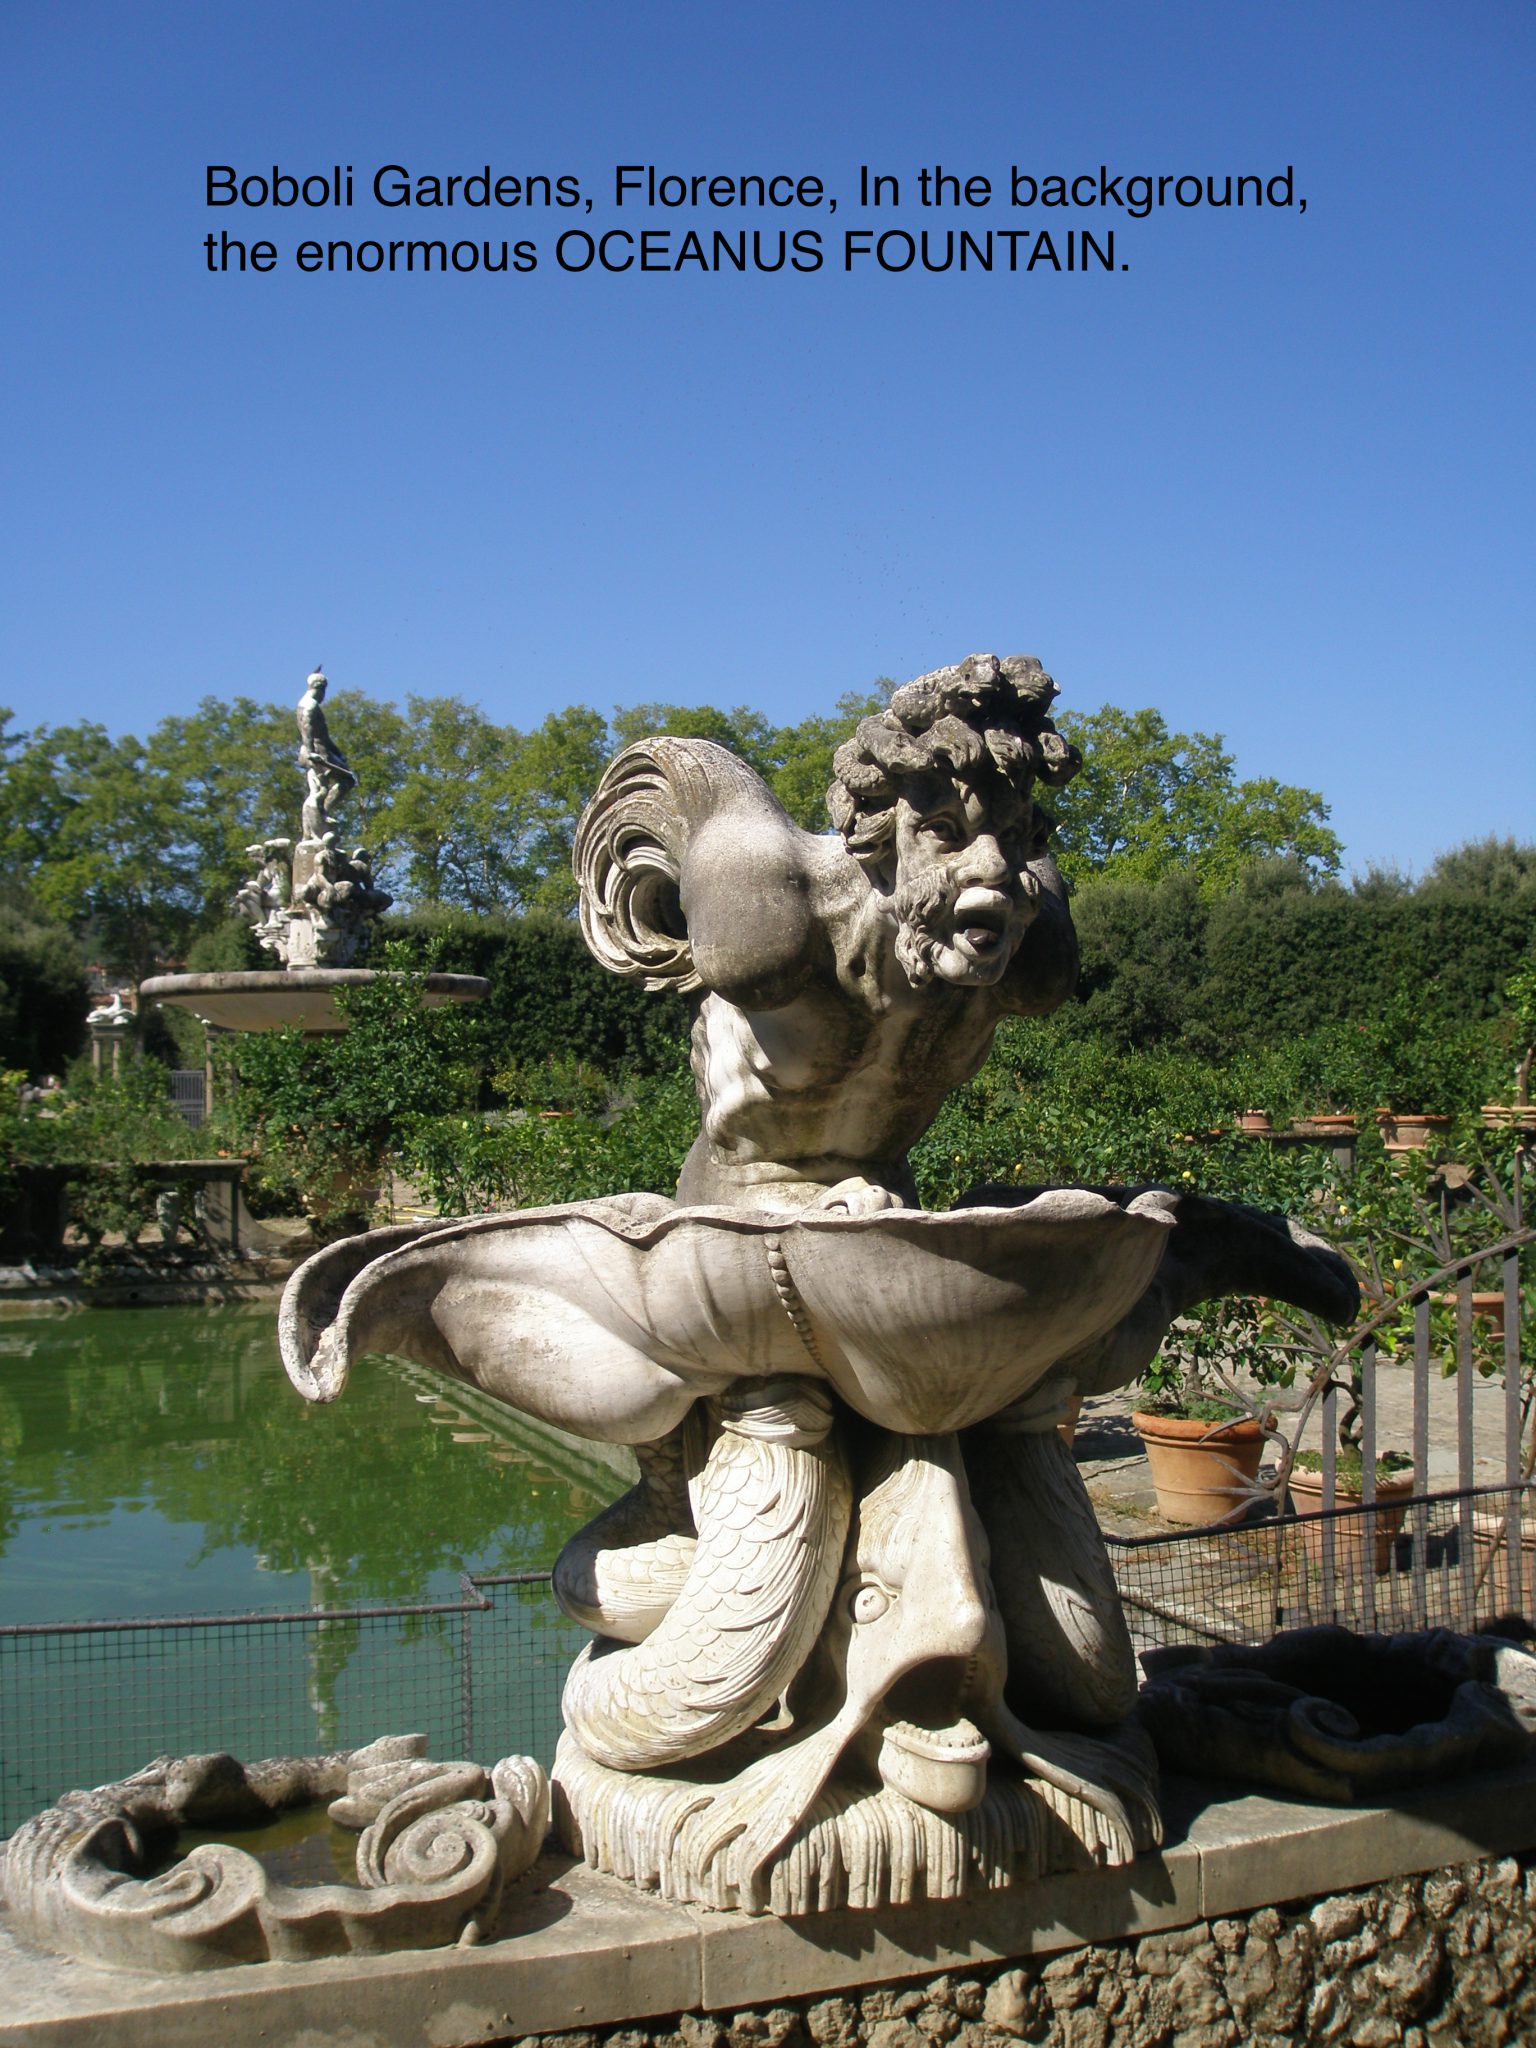 Another peek at the Boboli Garden's Oceanus Fountain, which is in the background